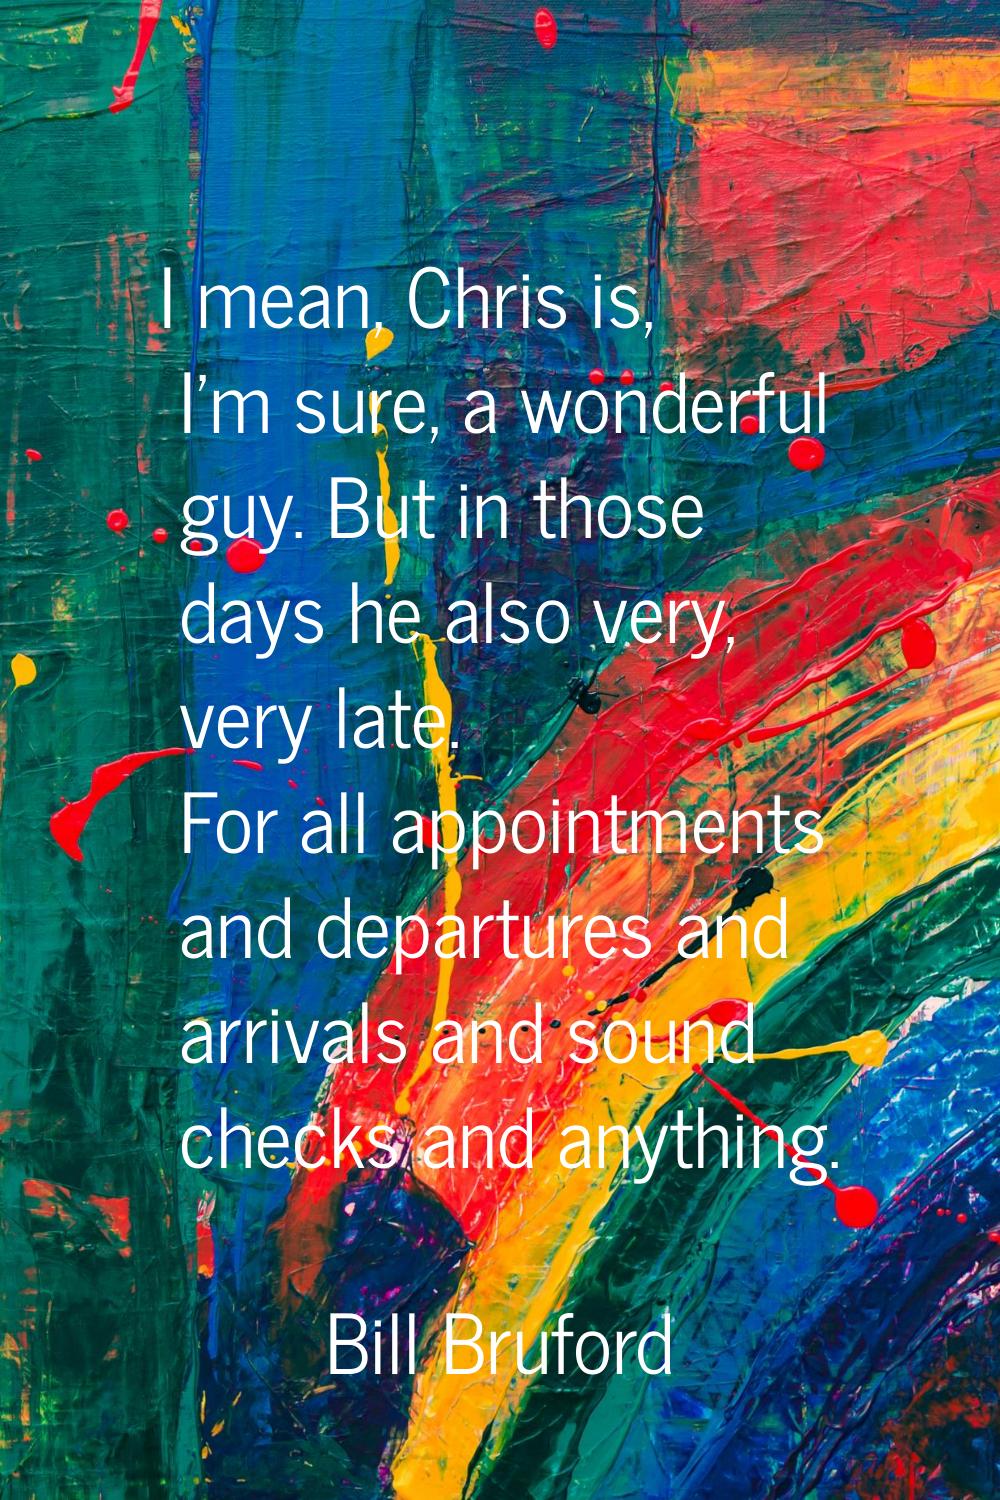 I mean, Chris is, I'm sure, a wonderful guy. But in those days he also very, very late. For all app